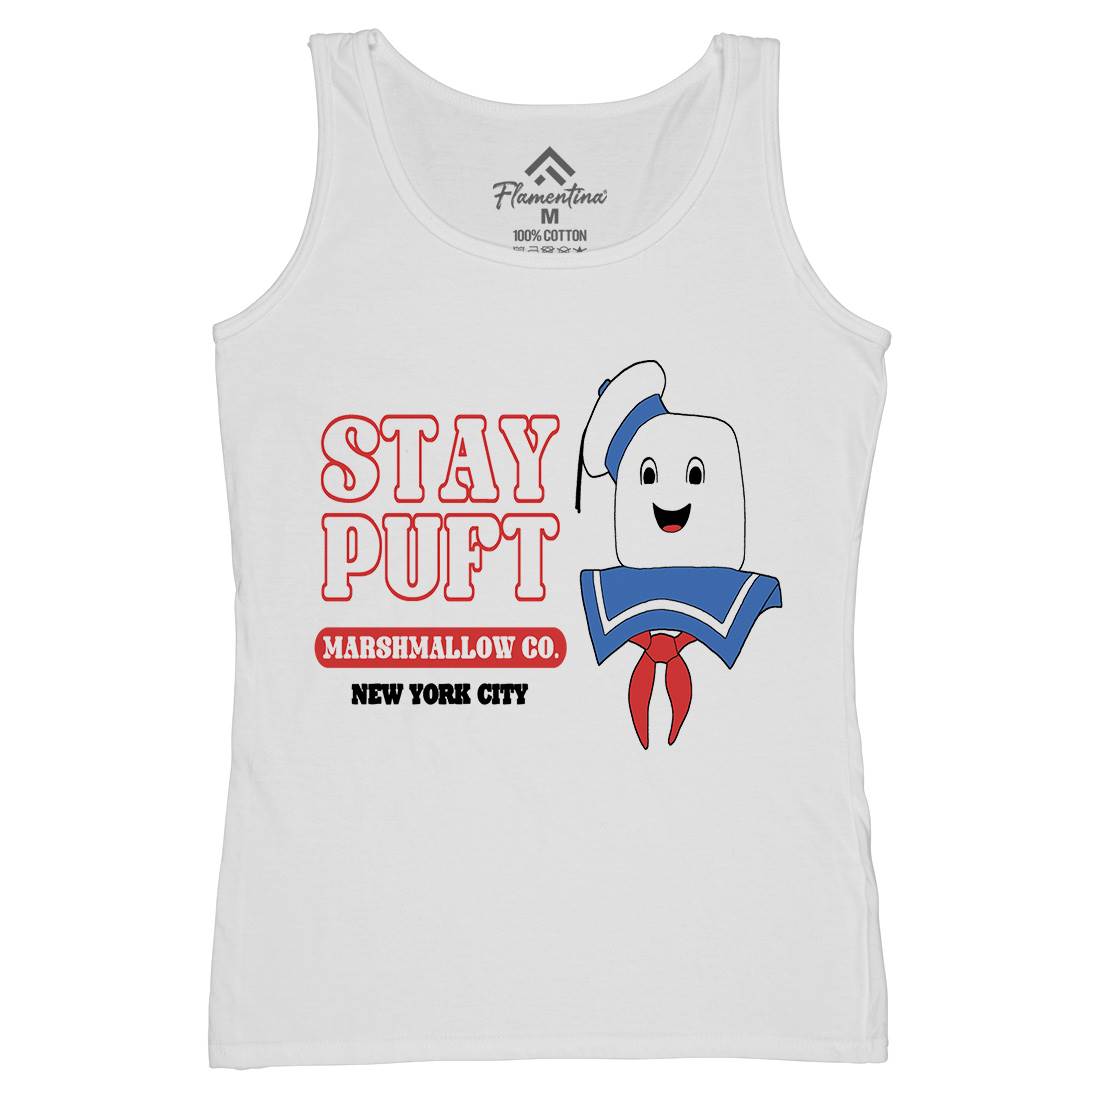 Stay Puft Co Womens Organic Tank Top Vest Space D141